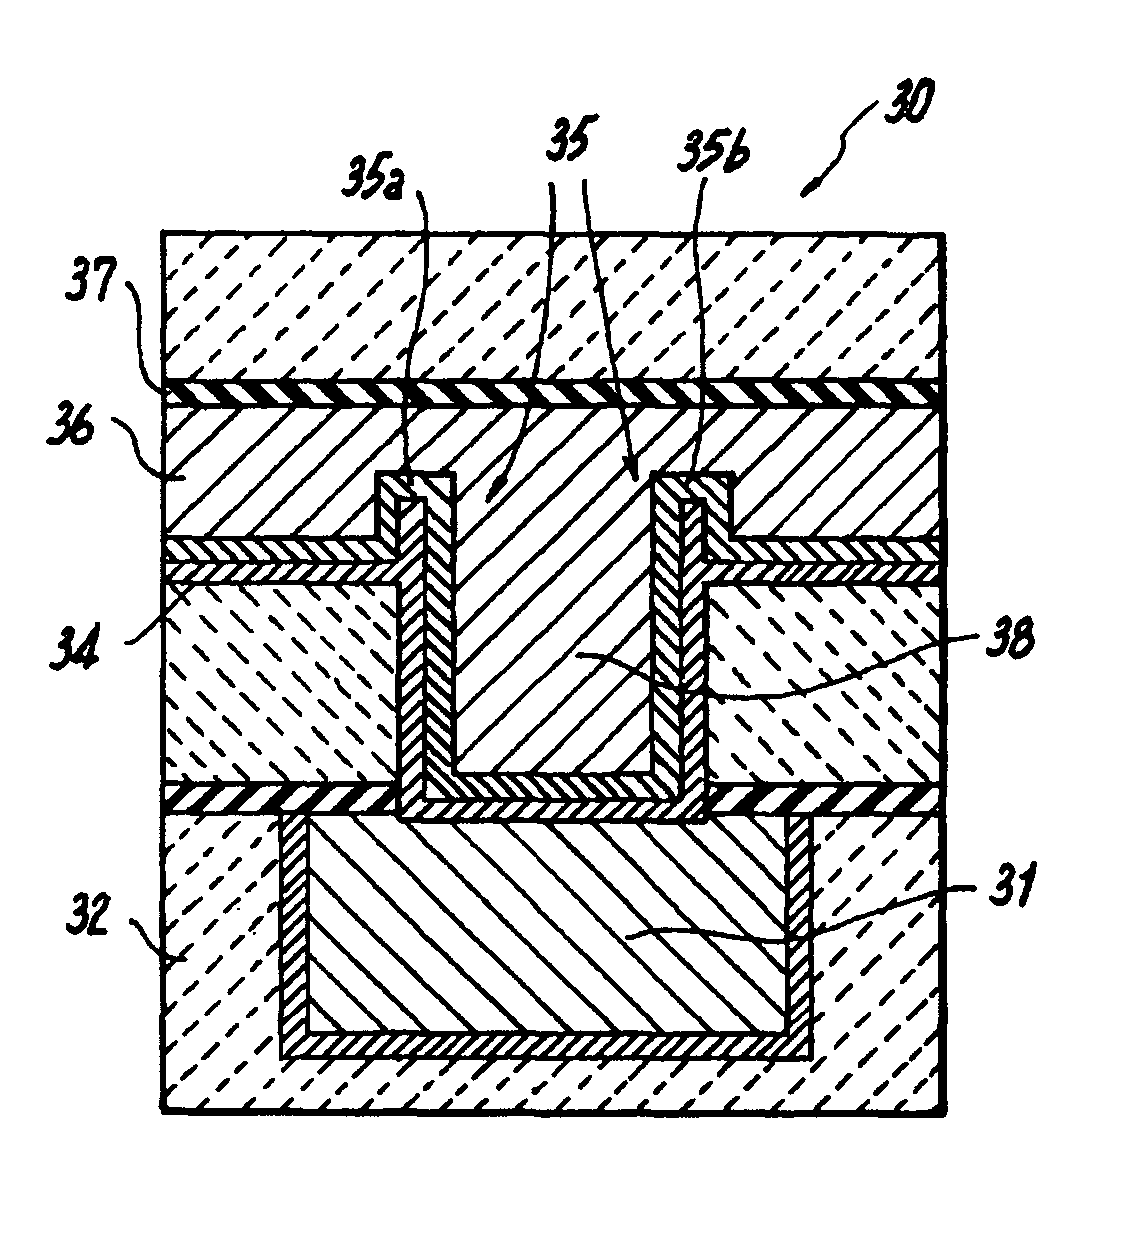 Partial inter-locking metal contact structure for semiconductor devices and method of manufacture